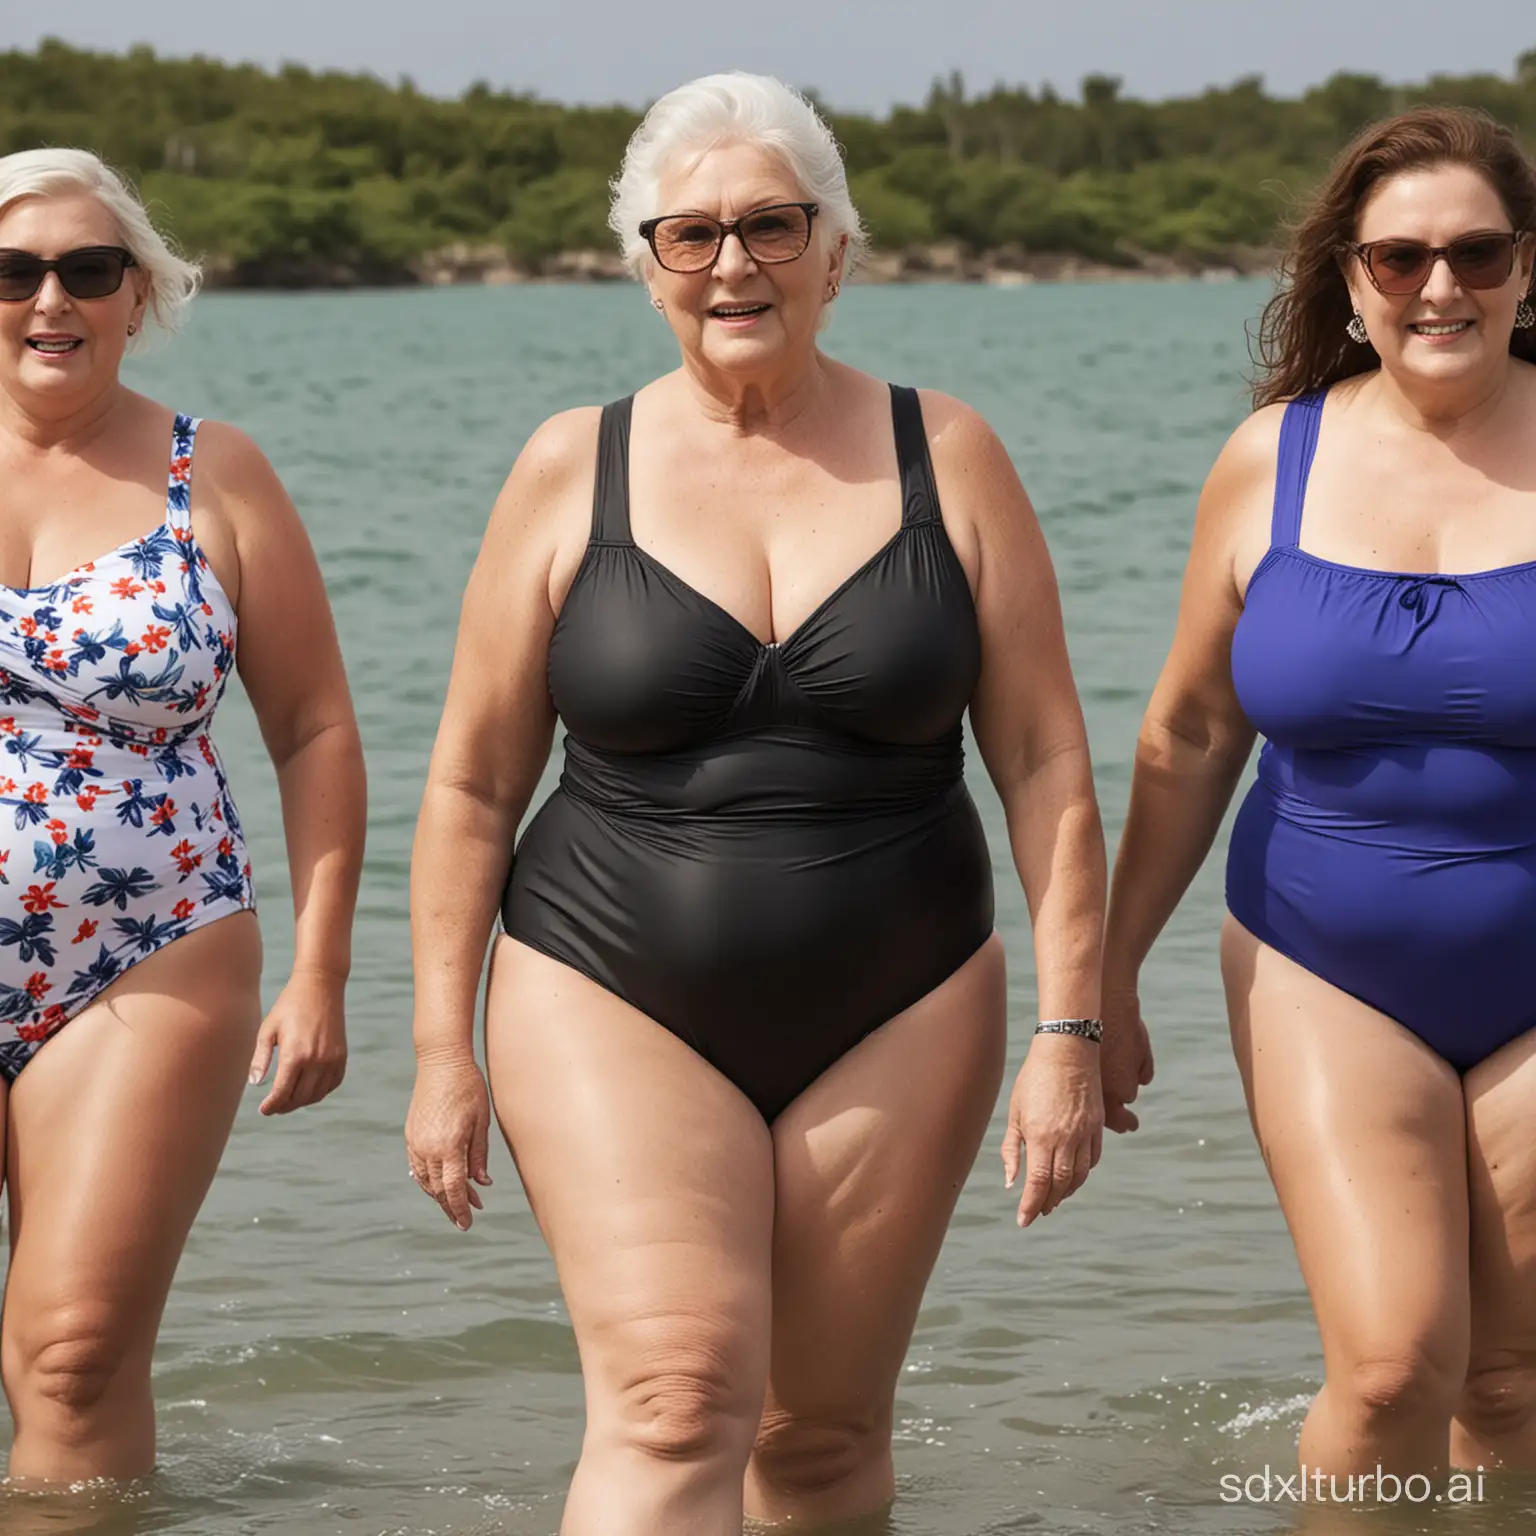 Elderly Women in Plus-Size Swimsuits Take on Election Day